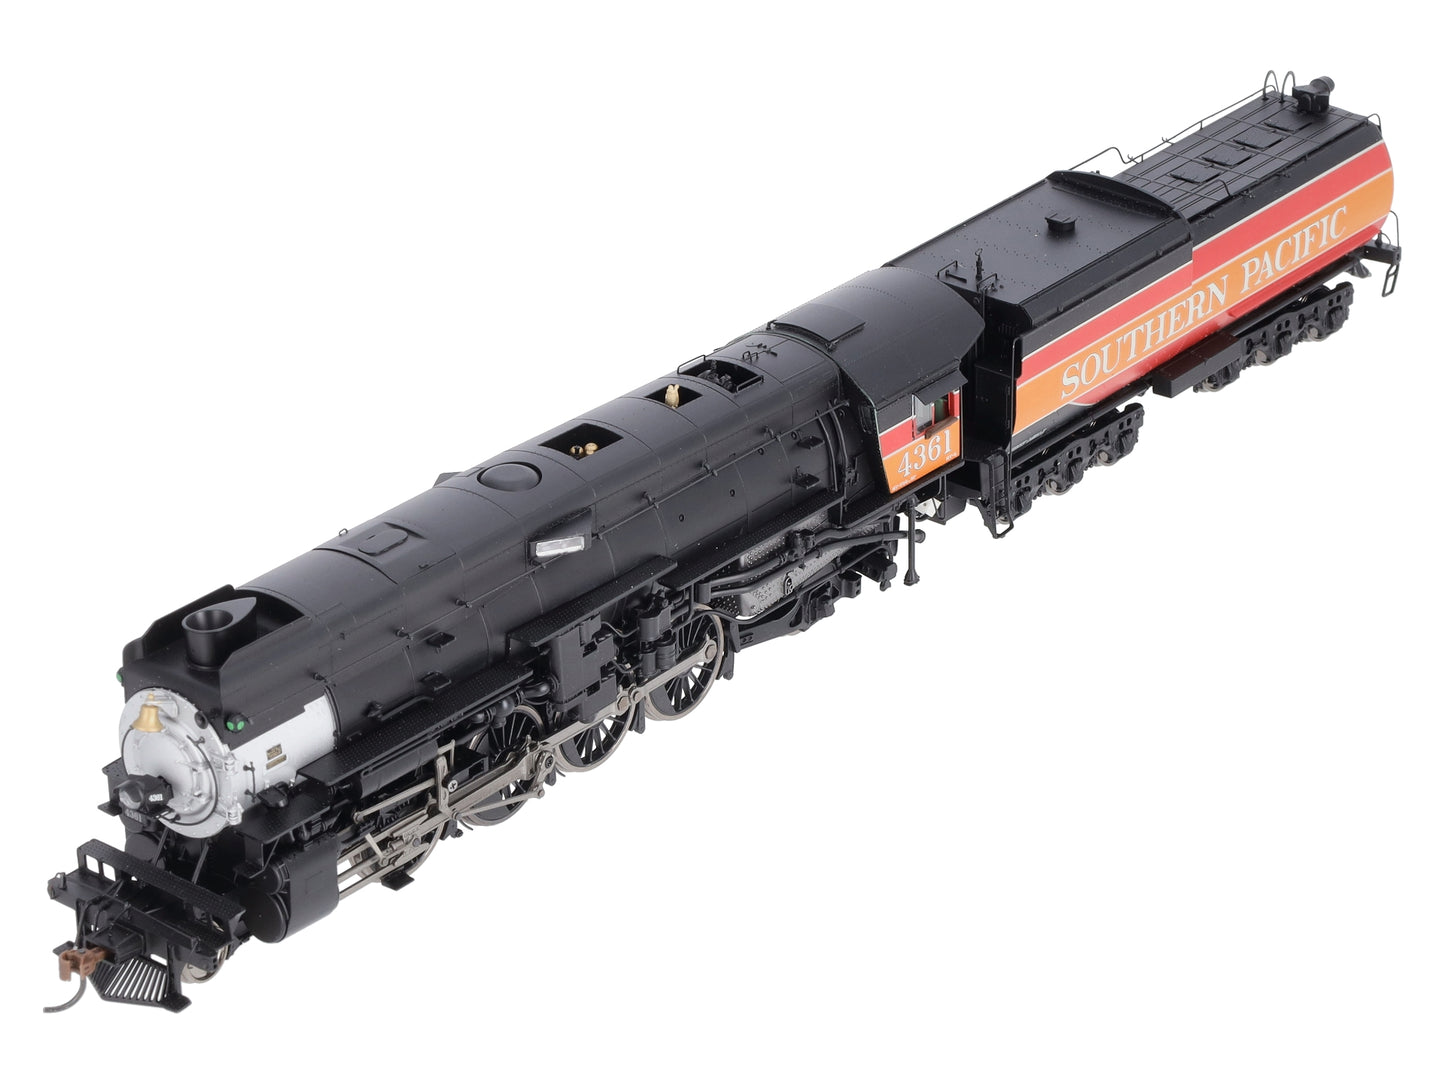 Athearn G97059 HO Southern Pacific 4-8-2 MT-4 Steam Loco w/Skyline Casing #4361